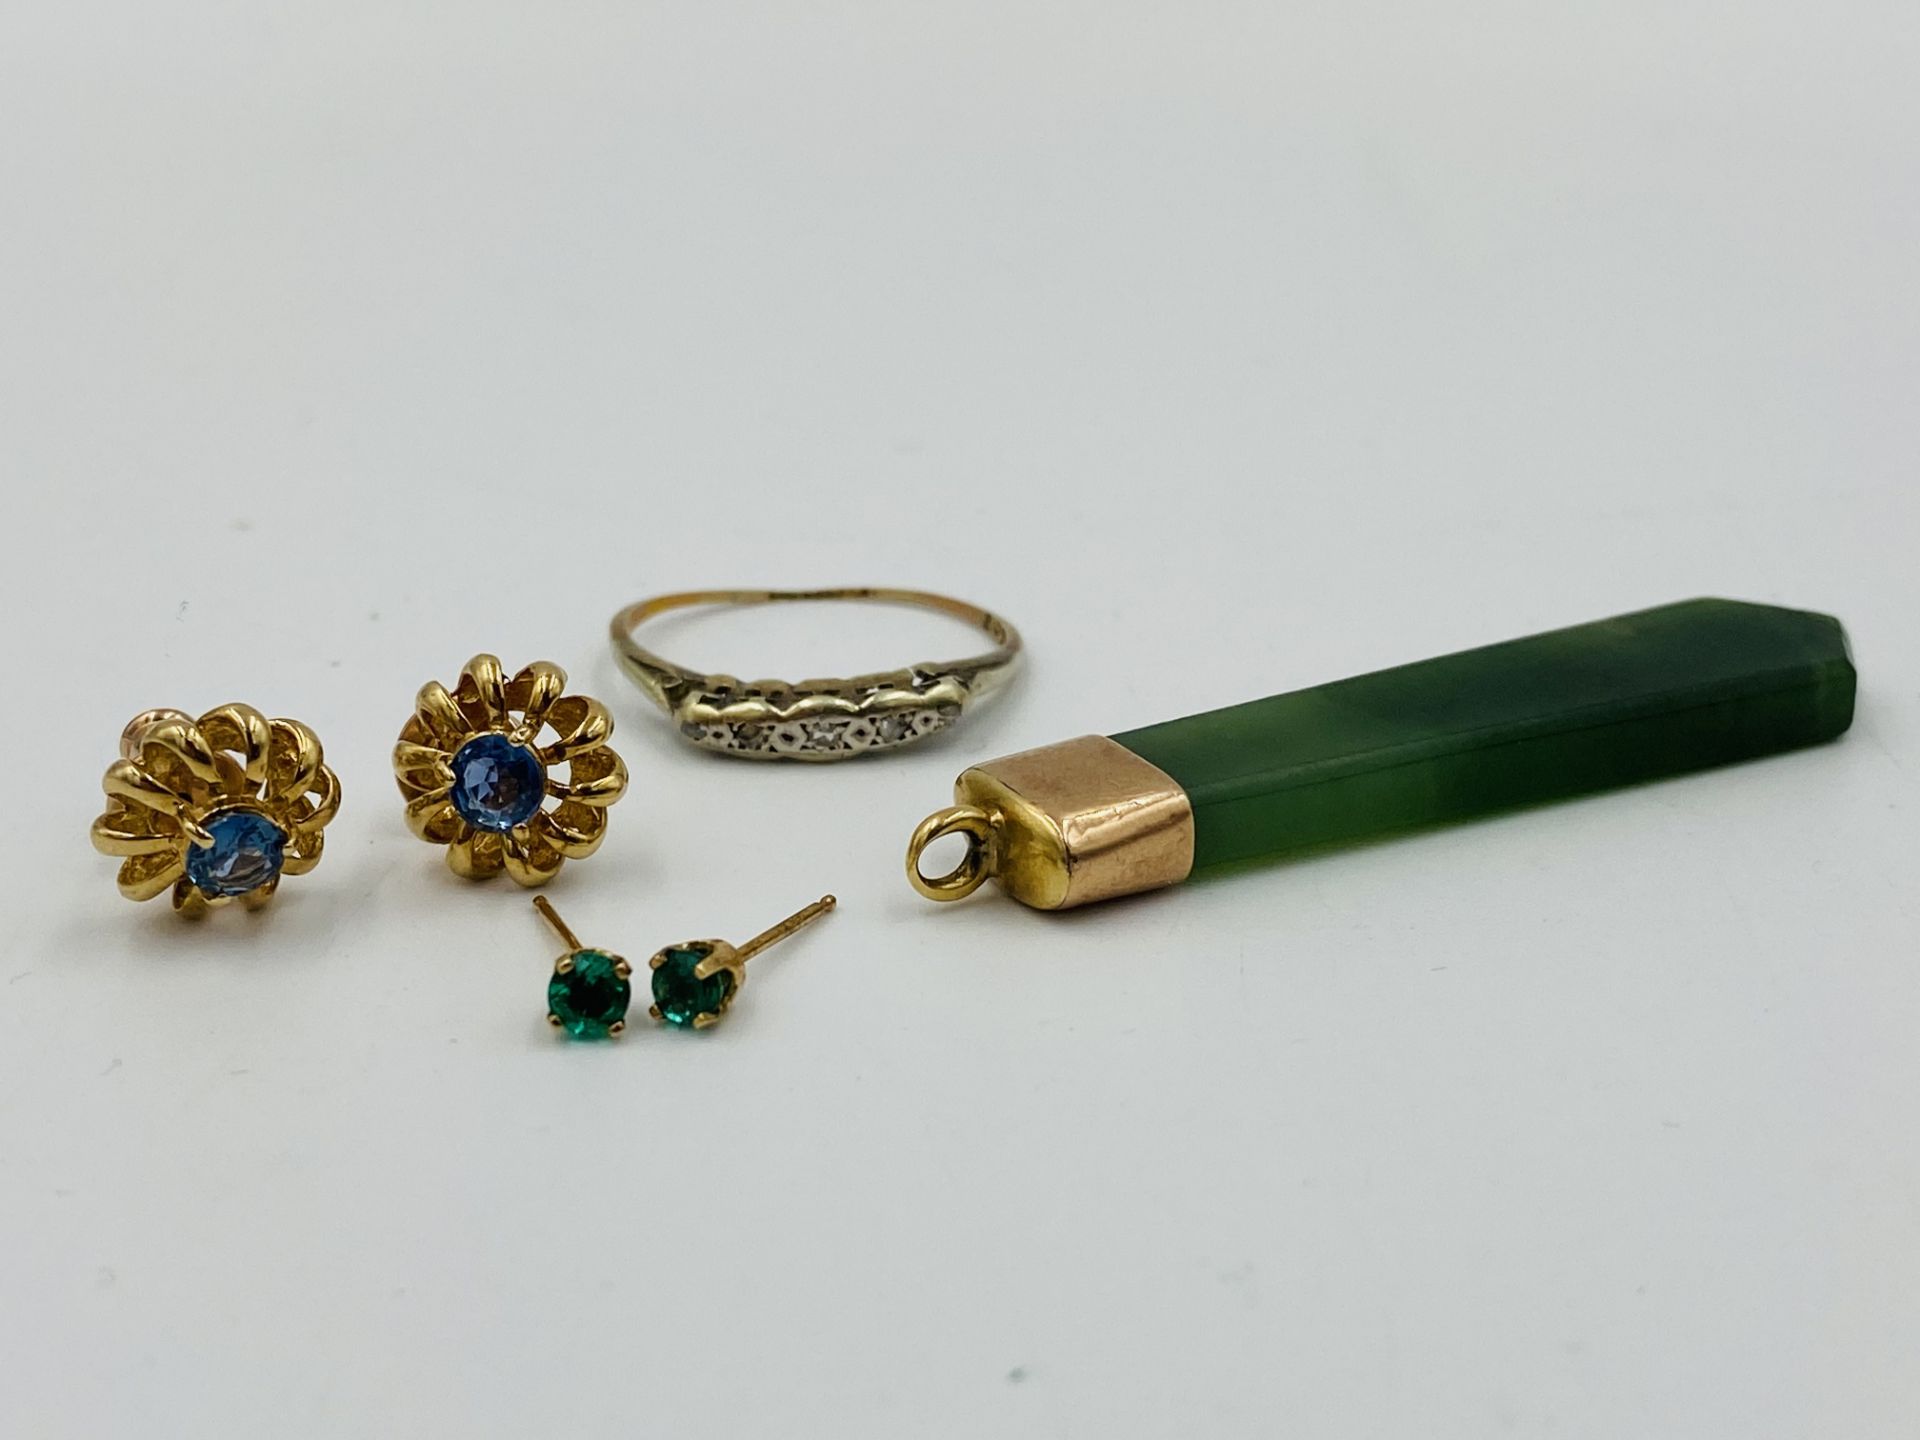 9ct gold ring and other items - Image 2 of 3